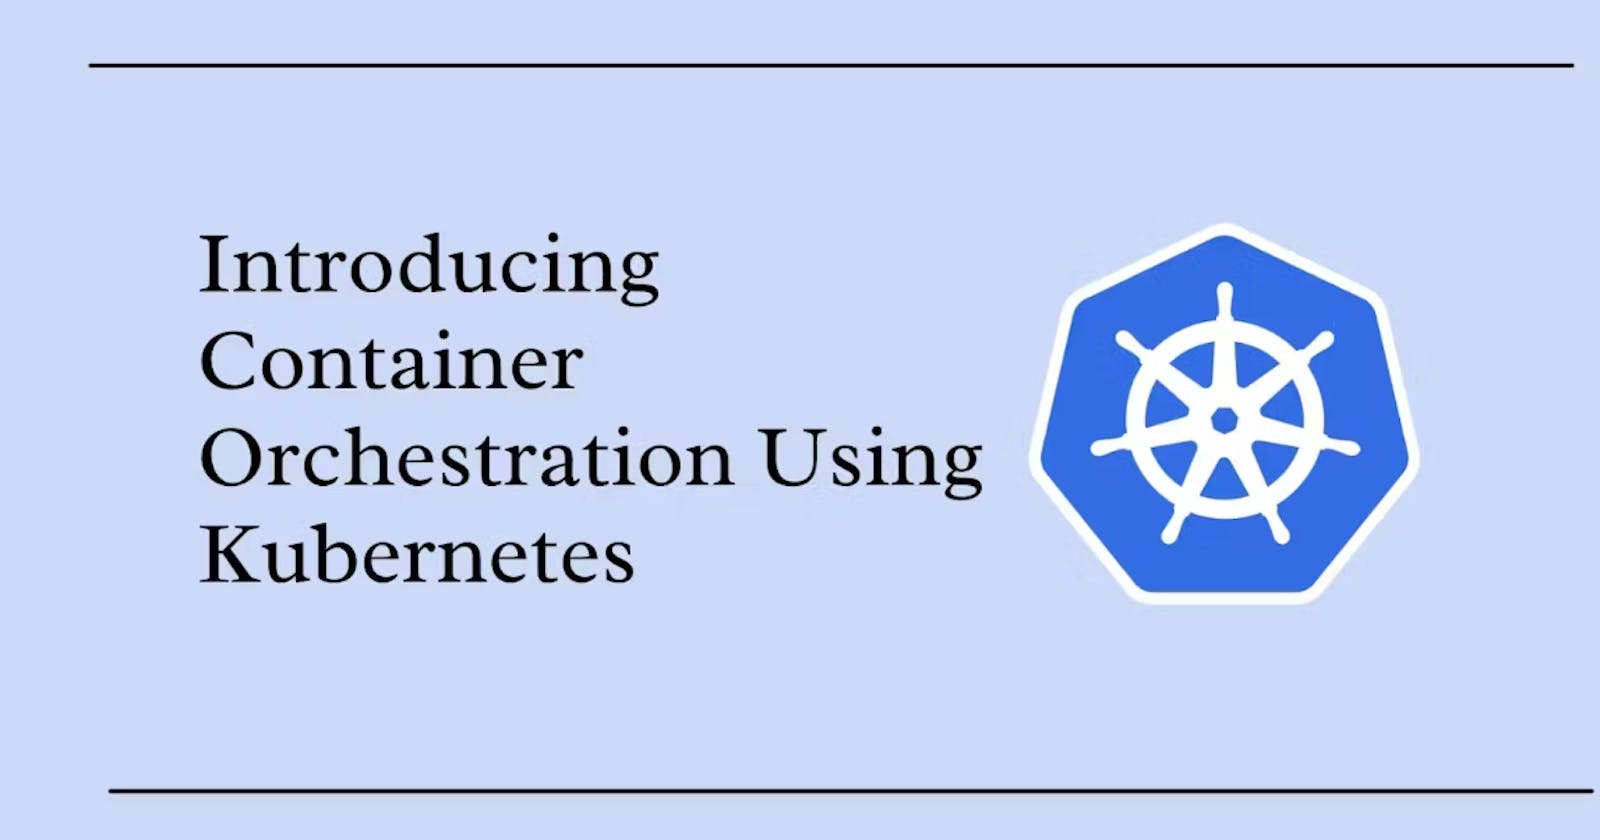 DAY 30: Power of Kubernetes and Container Orchestration